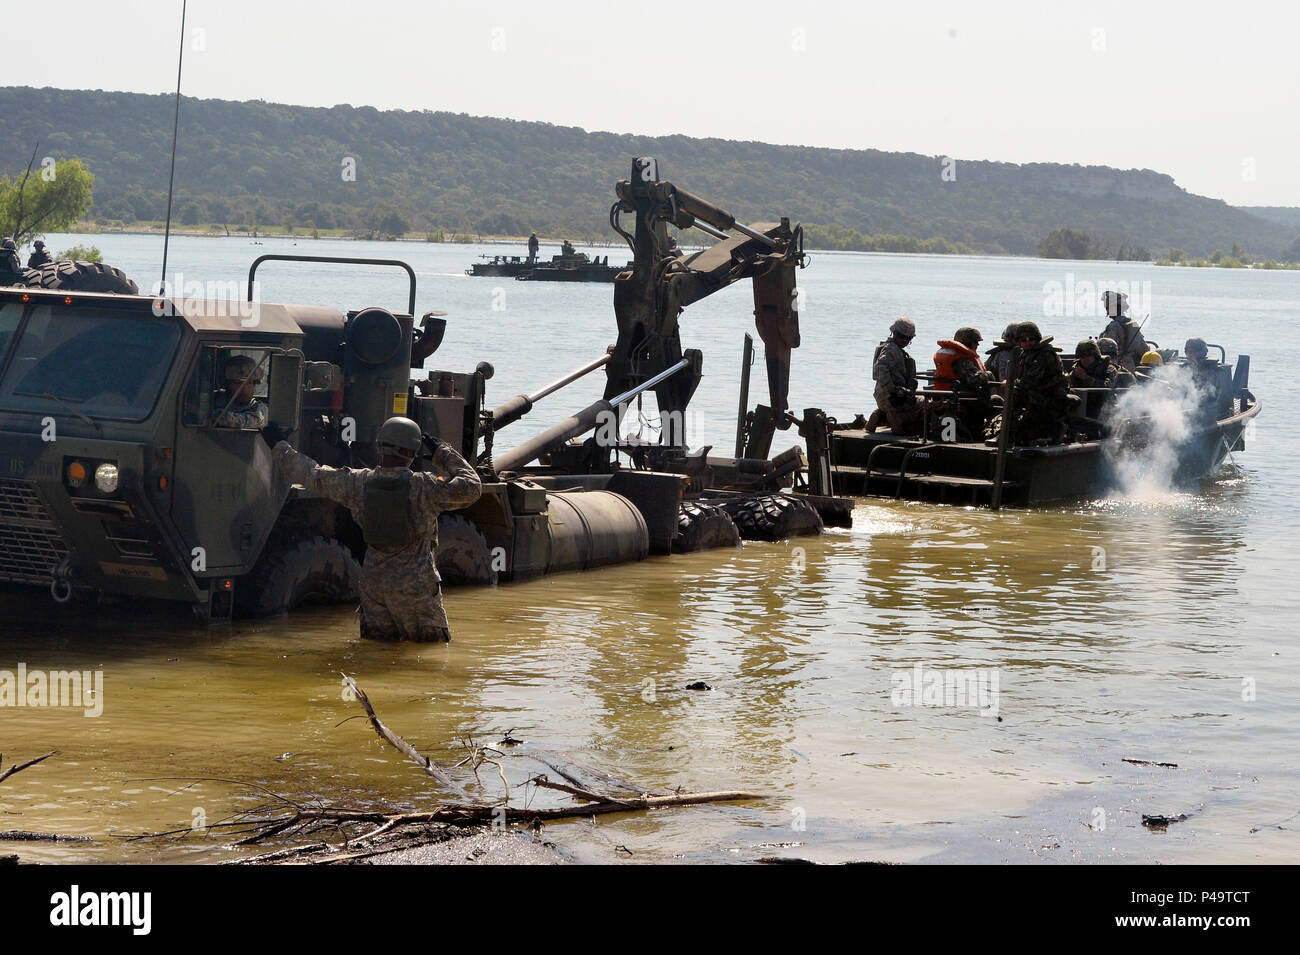 Texas Army National Guardsmen from the 551st Multi Role Bridge Company (MRBC) work together to load boats into the lake as part of a first-time Multinational Lumberjack River Exercise, June 21, 2016, Fort Hood, Texas. During the exercise, service members from the Texas National Guards 386th Engineer Battalion, 551st MRBC, and the Czech Republic will conduct a Wet Gap Crossing to transport military vehicles across Lake Belton. (U.S. Army National Guard photo by Sgt. Elizabeth Pena/Released) Stock Photo